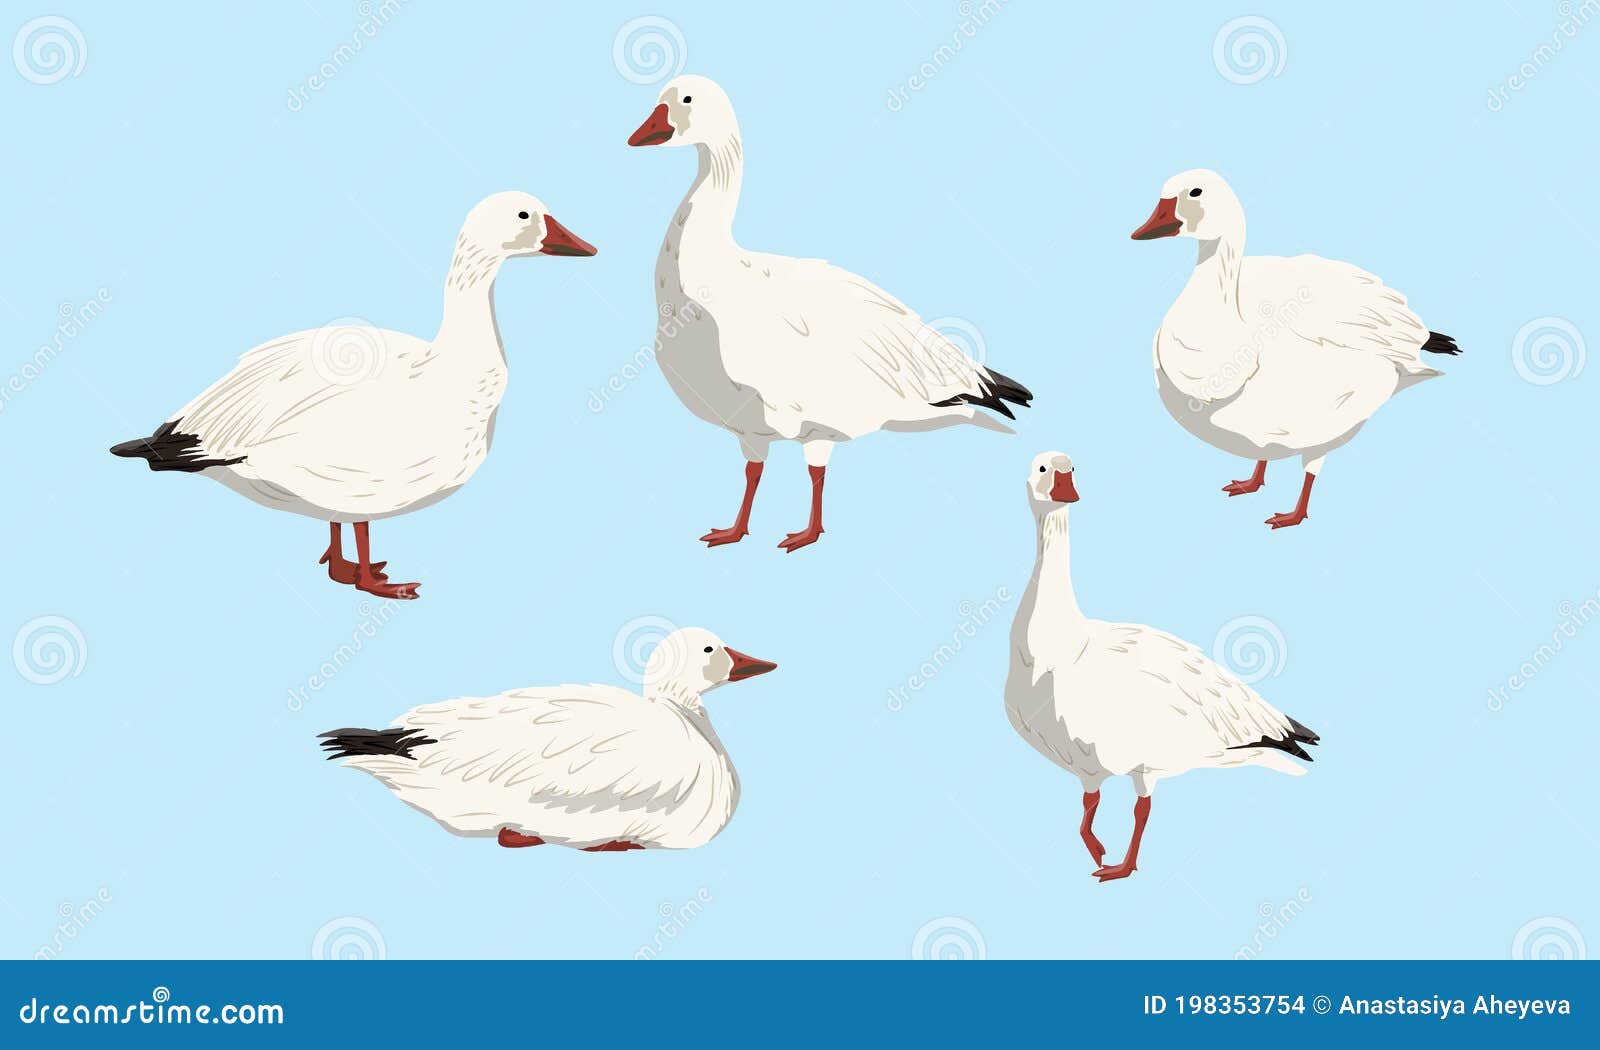 collection of snow geese. white arctic goose anser caerulescens. birds of the north, inhabiting greenland, alaska, canada, siberia